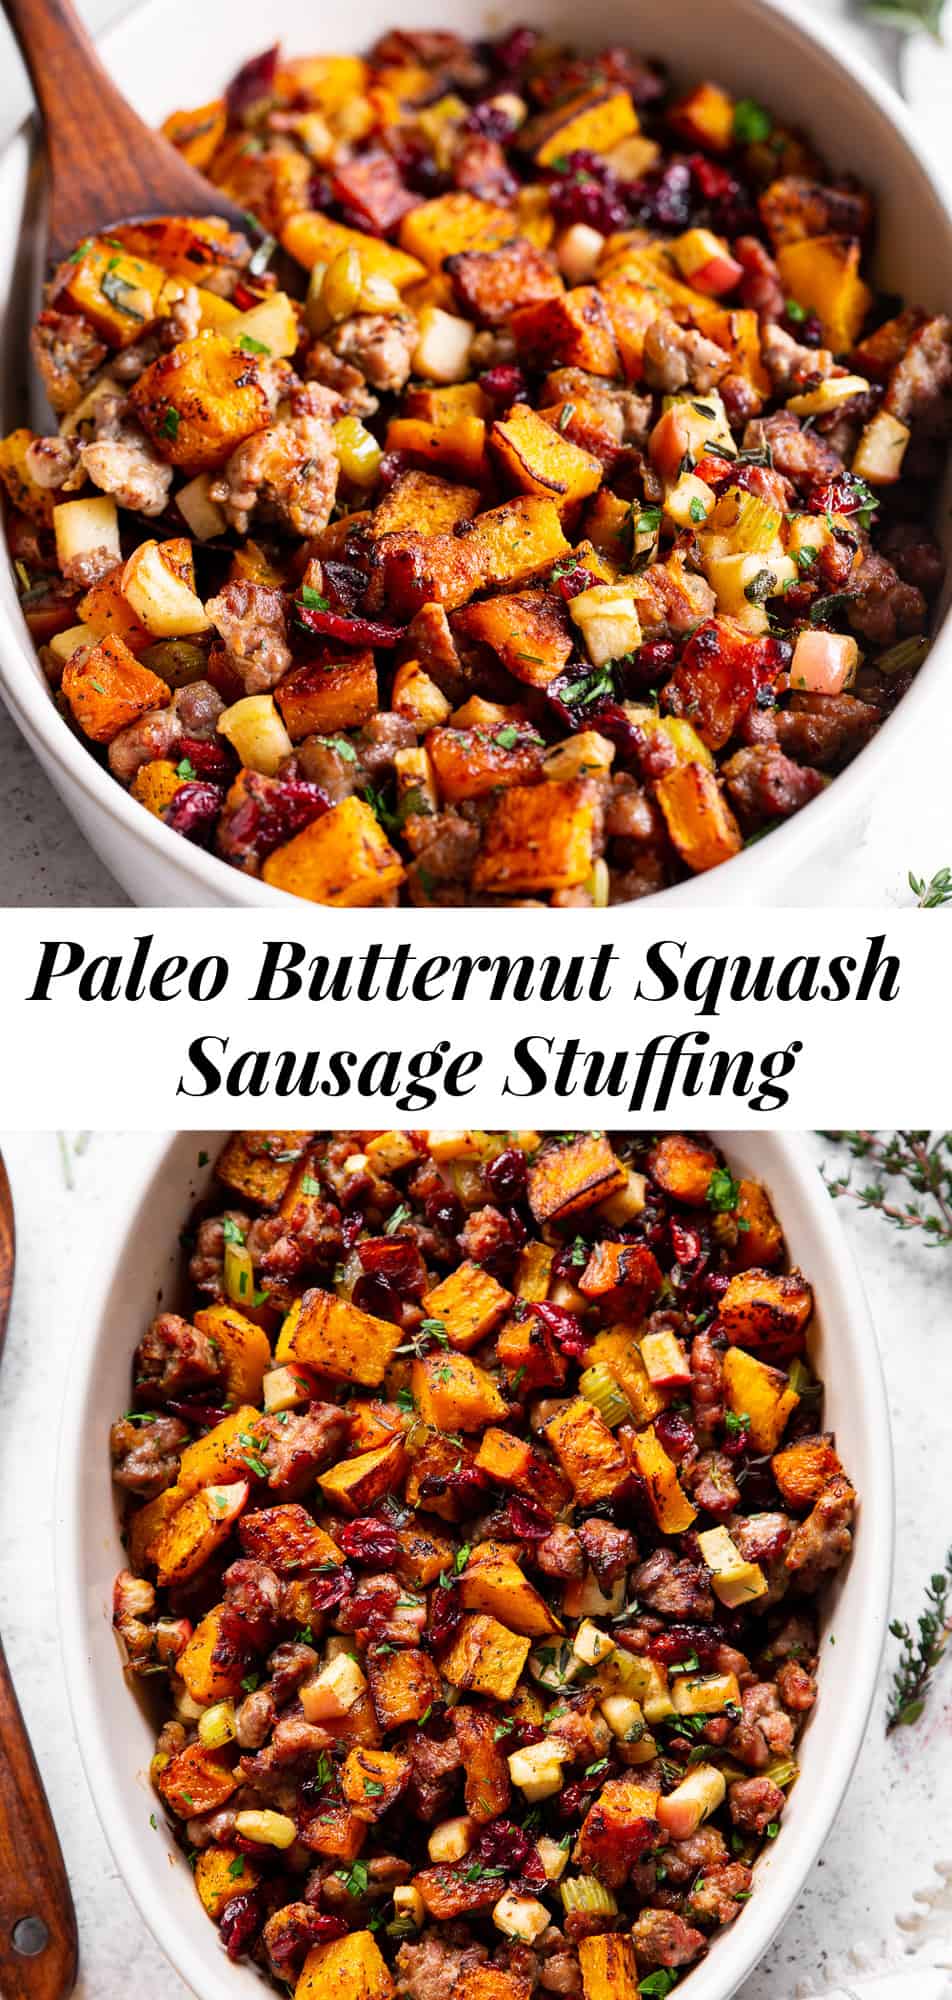 This delicious Butternut Sausage Paleo Stuffing with apples and cranberries has all the flavor of traditional Thanksgiving stuffing or dressing but is grain free, gluten free, dairy free and Whole30 friendly too! Toasty, sweet roasted butternut squash and savory sausage form the base for this Paleo style holiday favorite. #paleo #thanksgiving #sidedish #butternutsquash #cleaneating #grainfree #whole30